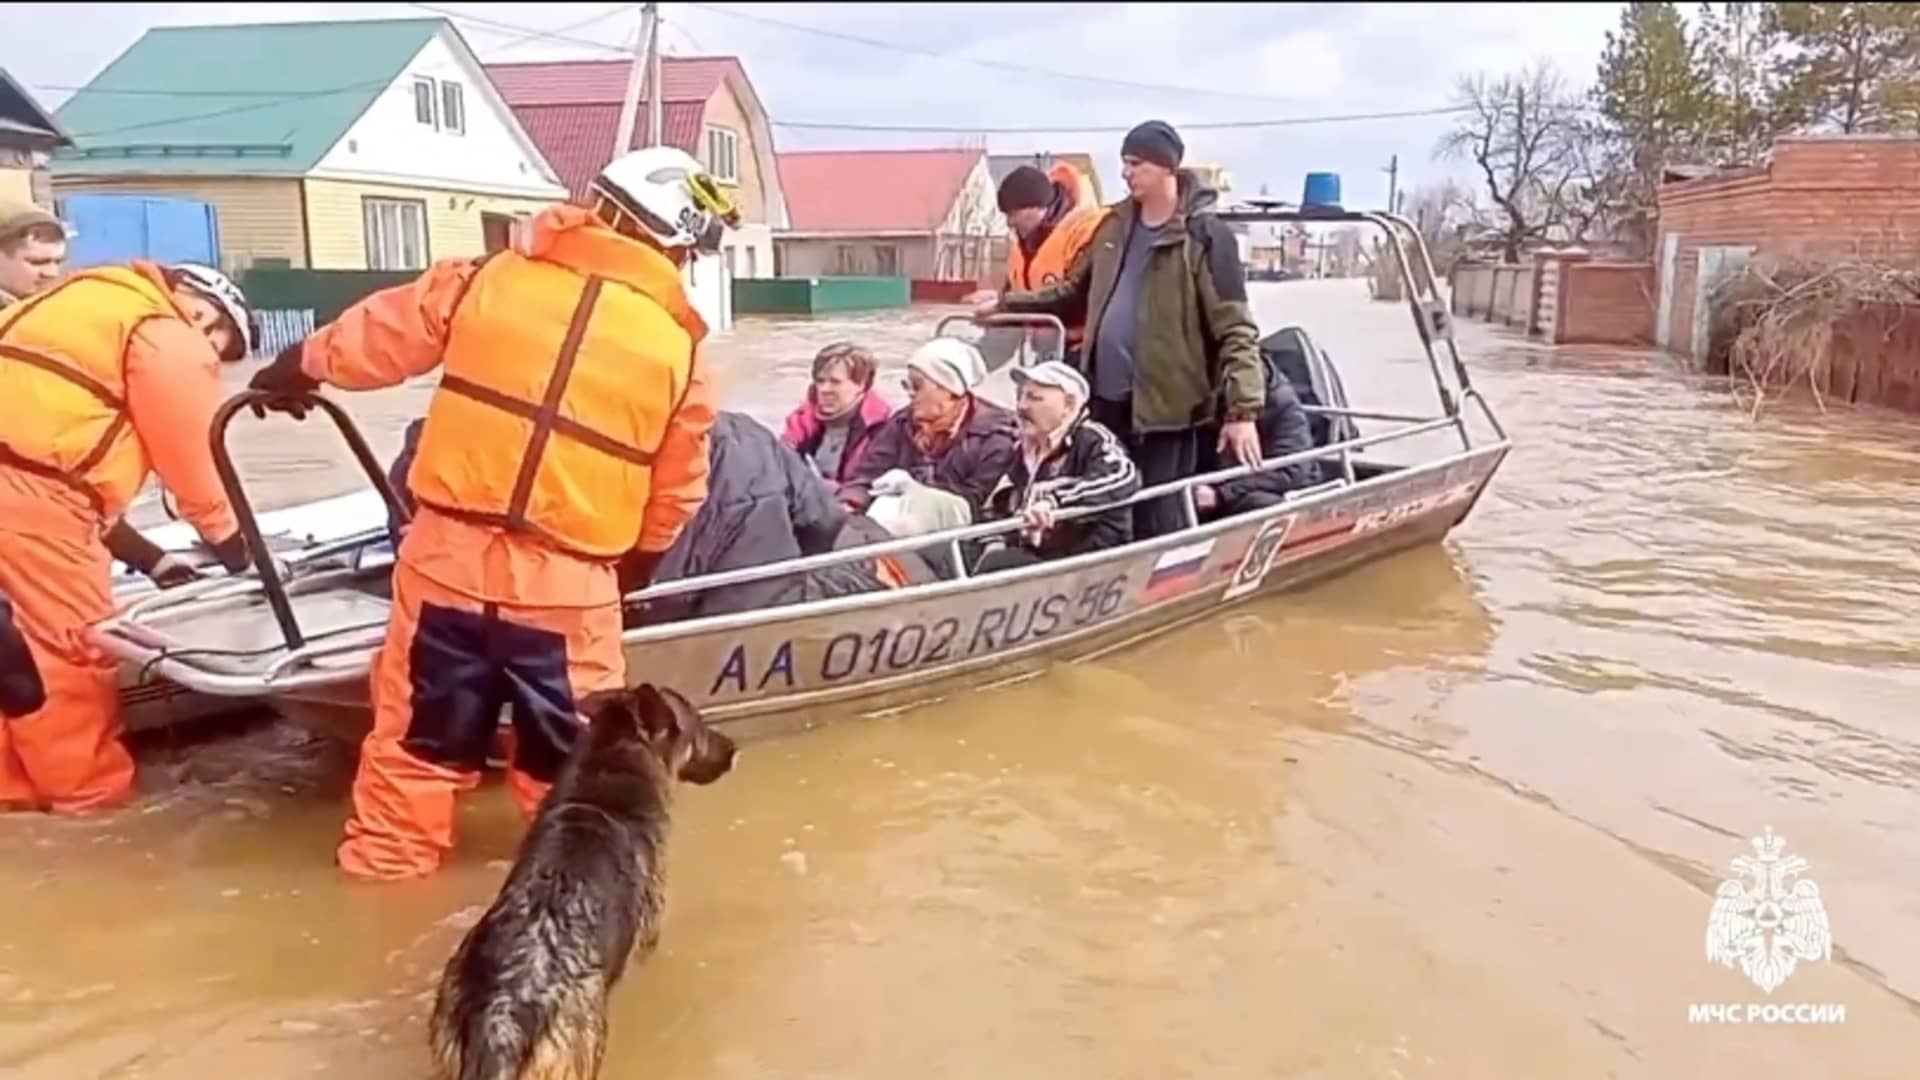 A screen grab captured from a video shows residents and pets are being evacuated collectively due to flooding after a dam burst in the city of Orsk, Russia on April 6, 2024.